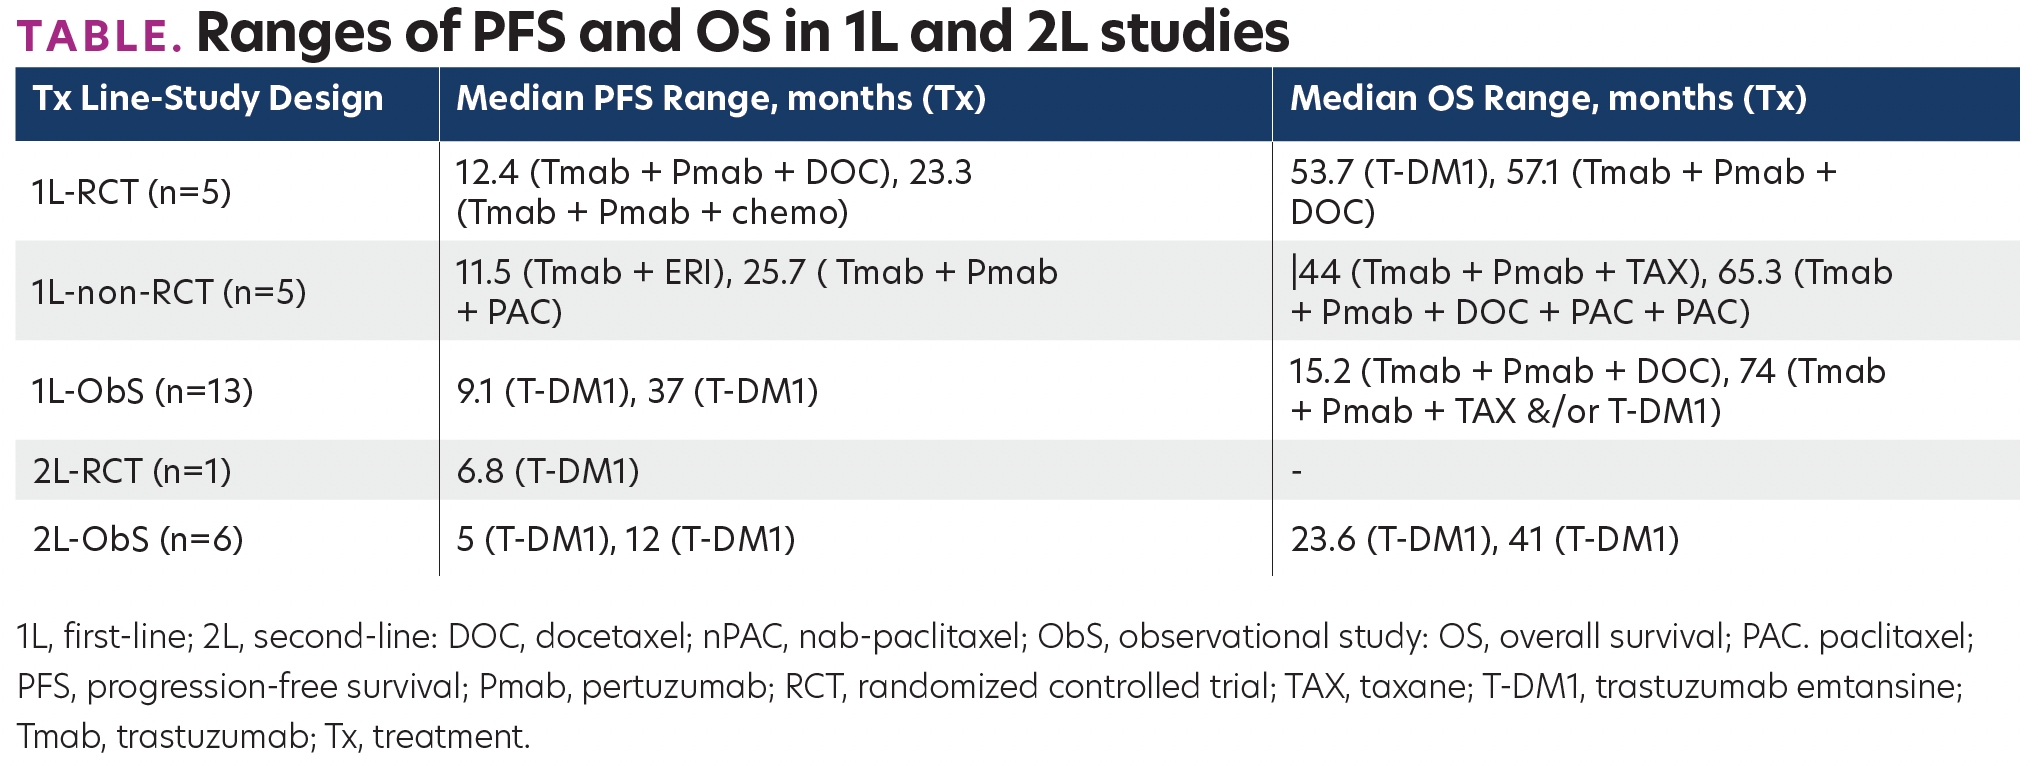 TABLE. Ranges of PFS and OS in 1L and 2L studies